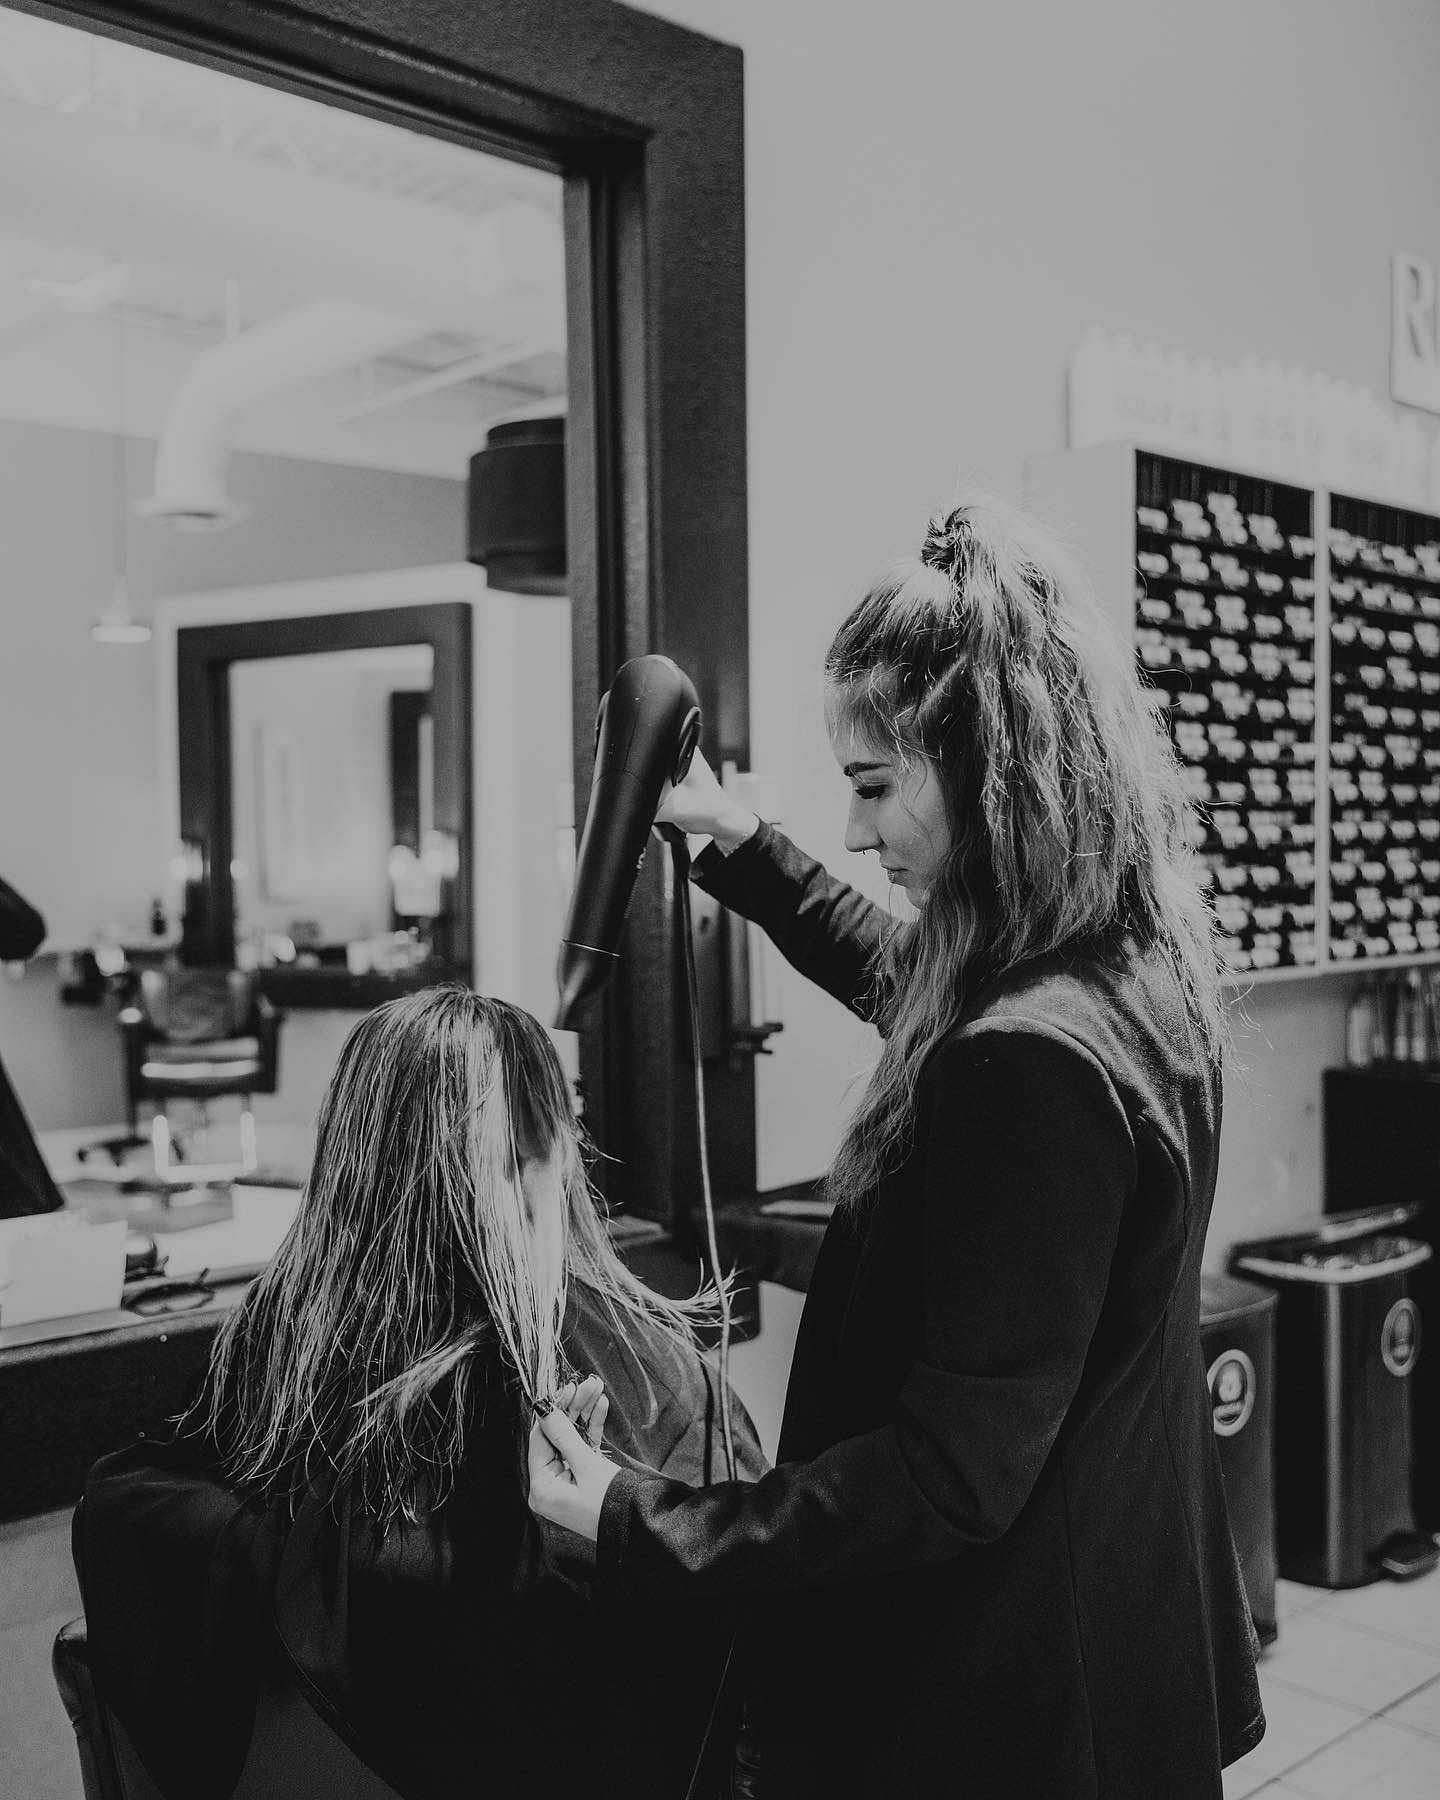 Hairdresser blow-drying woman's hair in salon.